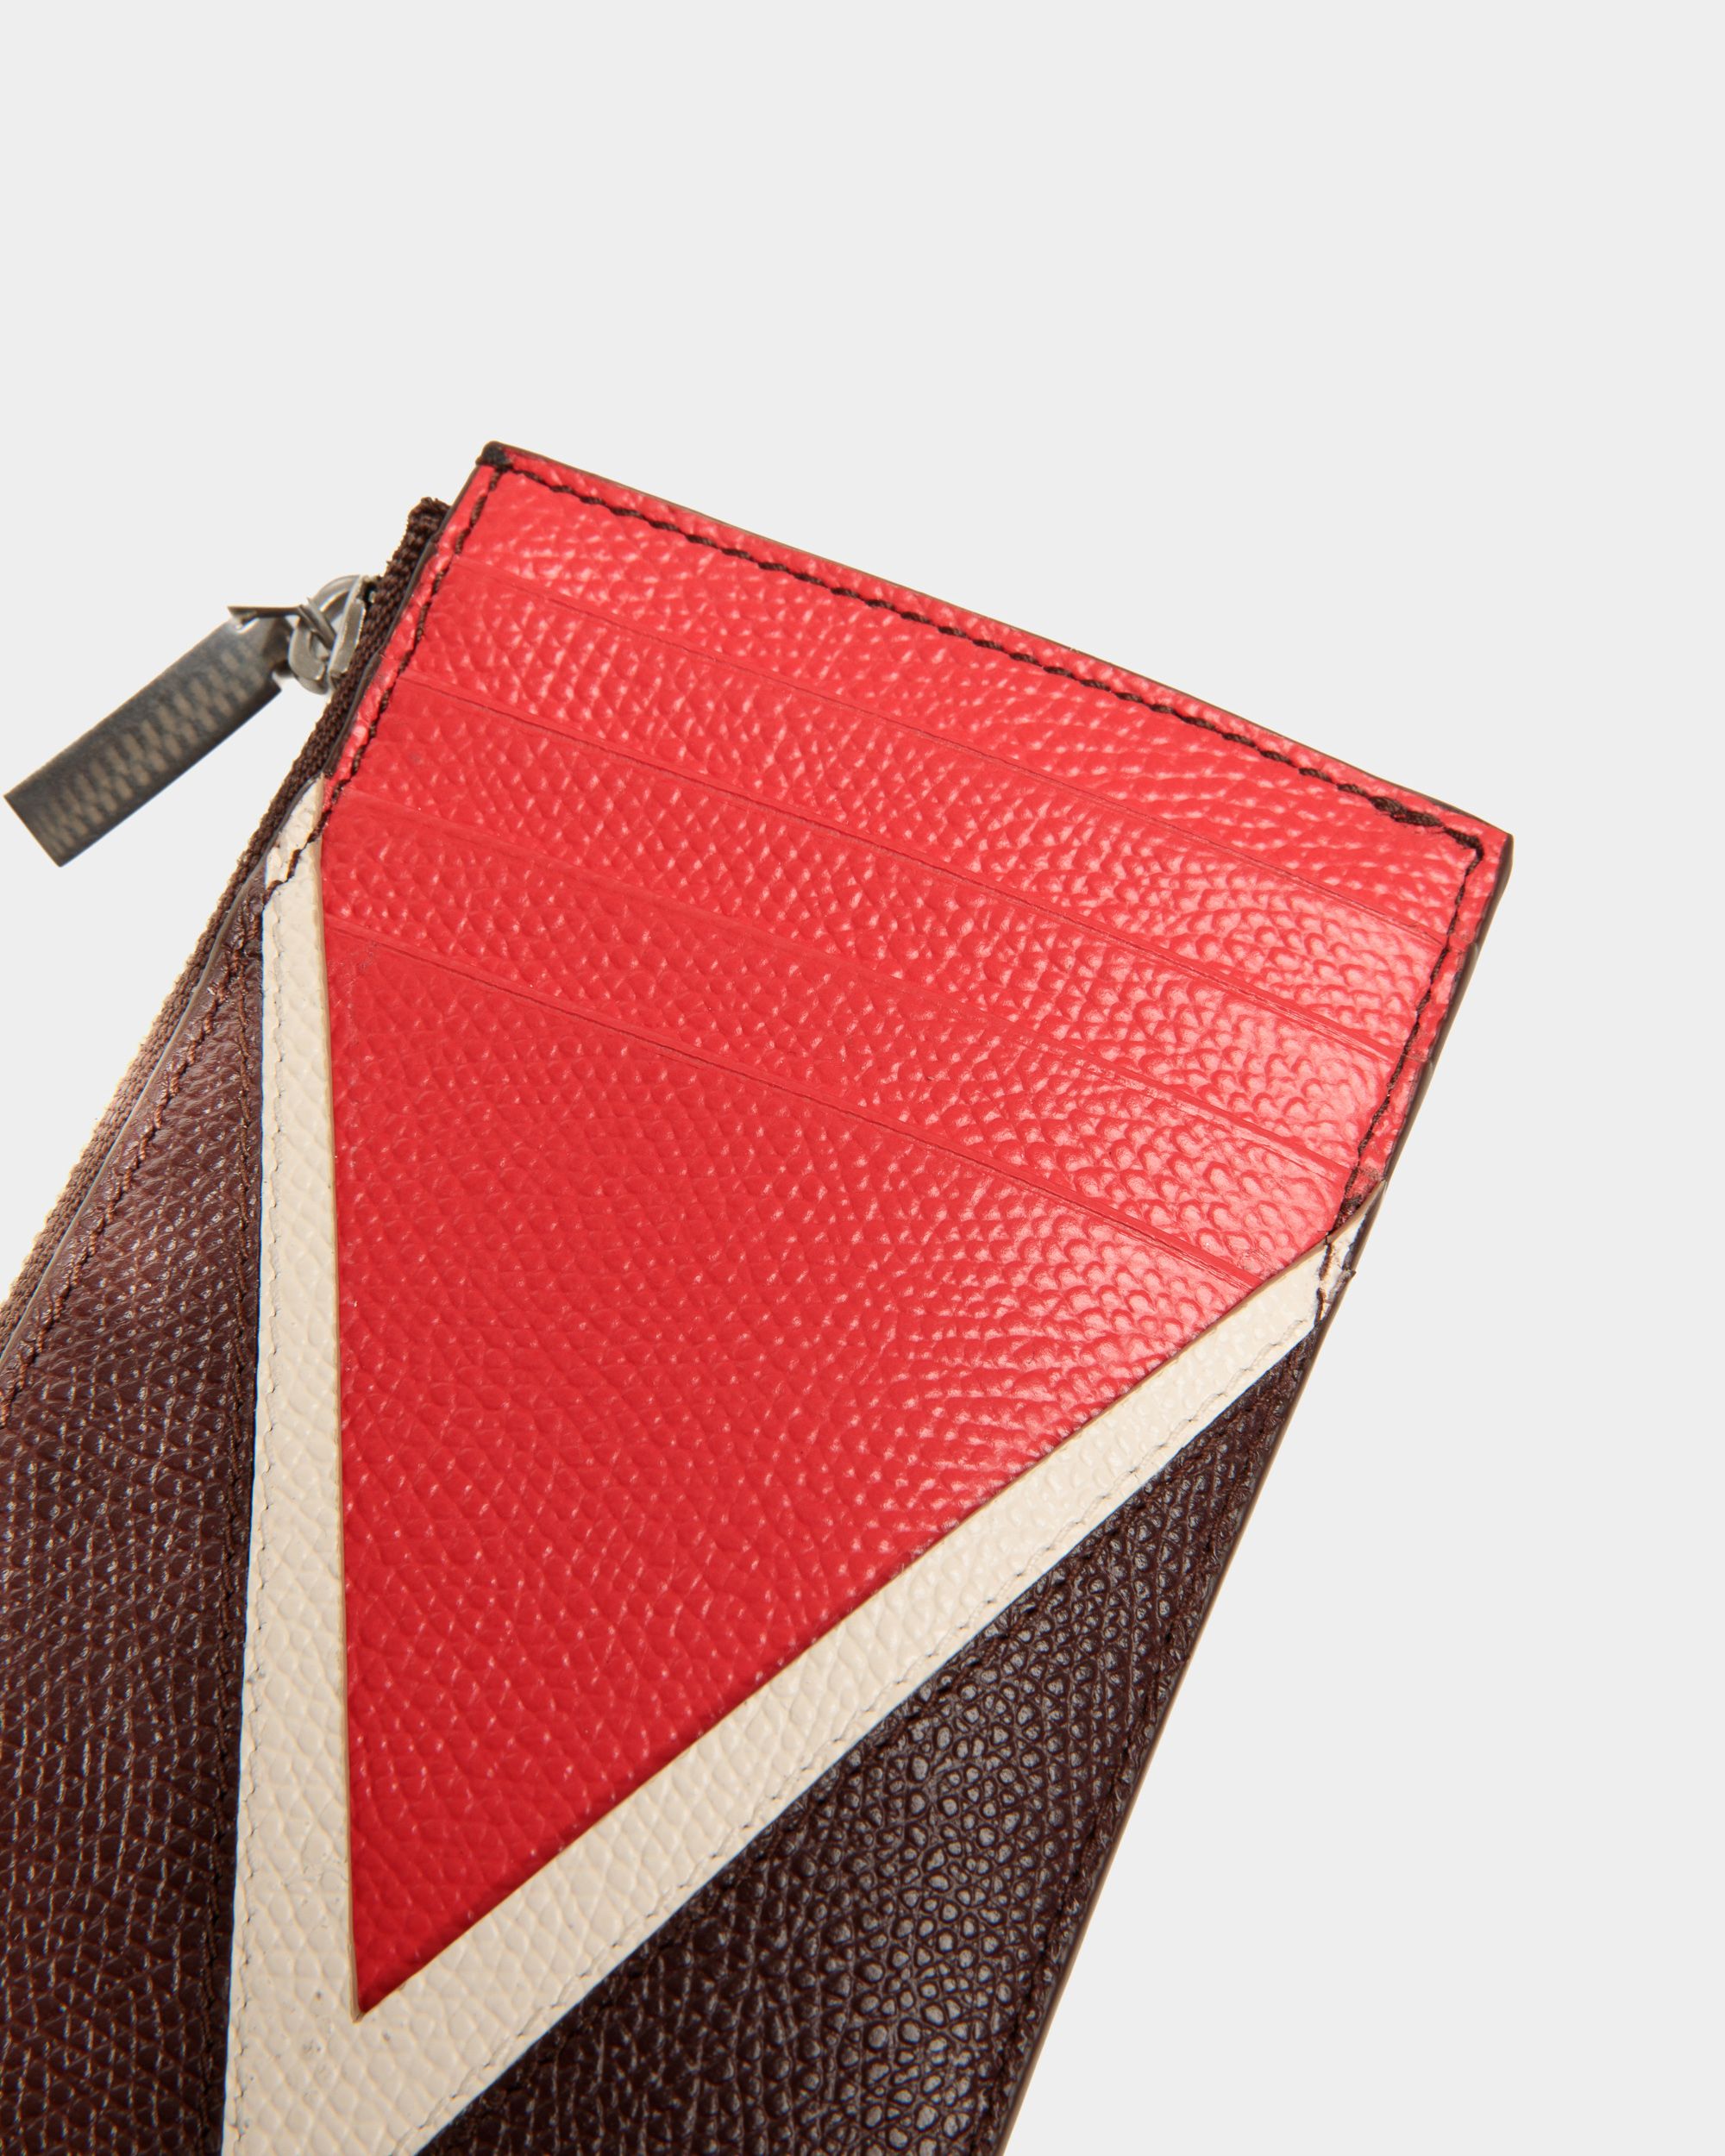 Flag | Men's Coin and Card Holder in Chestnut Brown and Red Embossed Leather | Bally | Still Life Detail